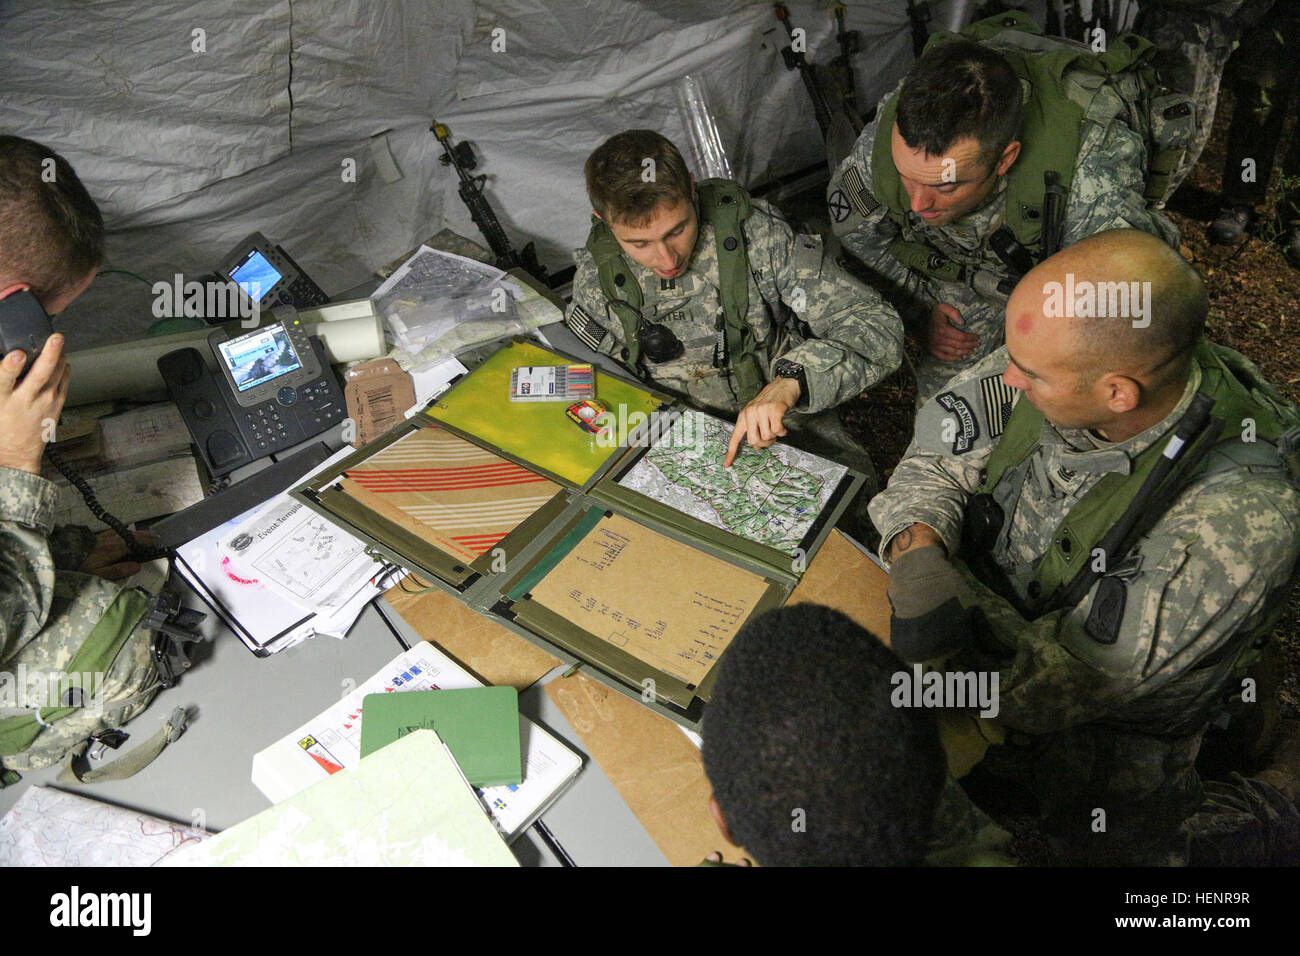 U.S. Soldiers with the 173rd Airborne Brigade Combat Team review a map in the tactical operations center Sept. 3, 2014, at the Joint Multinational Readiness Center in Hohenfels, Germany, during exercise Saber Junction 2014. Saber Junction is a U.S. Army Europe-led exercise designed to prepare U.S., NATO and international partner forces for unified land operations. (U.S. Army photo by Spc. Tyler Kingsbury/Released) U.S. Soldiers with the 173rd Airborne Brigade Combat Team review a map in the tactical operations center Sept 140903-A-LO967-001 Stock Photo